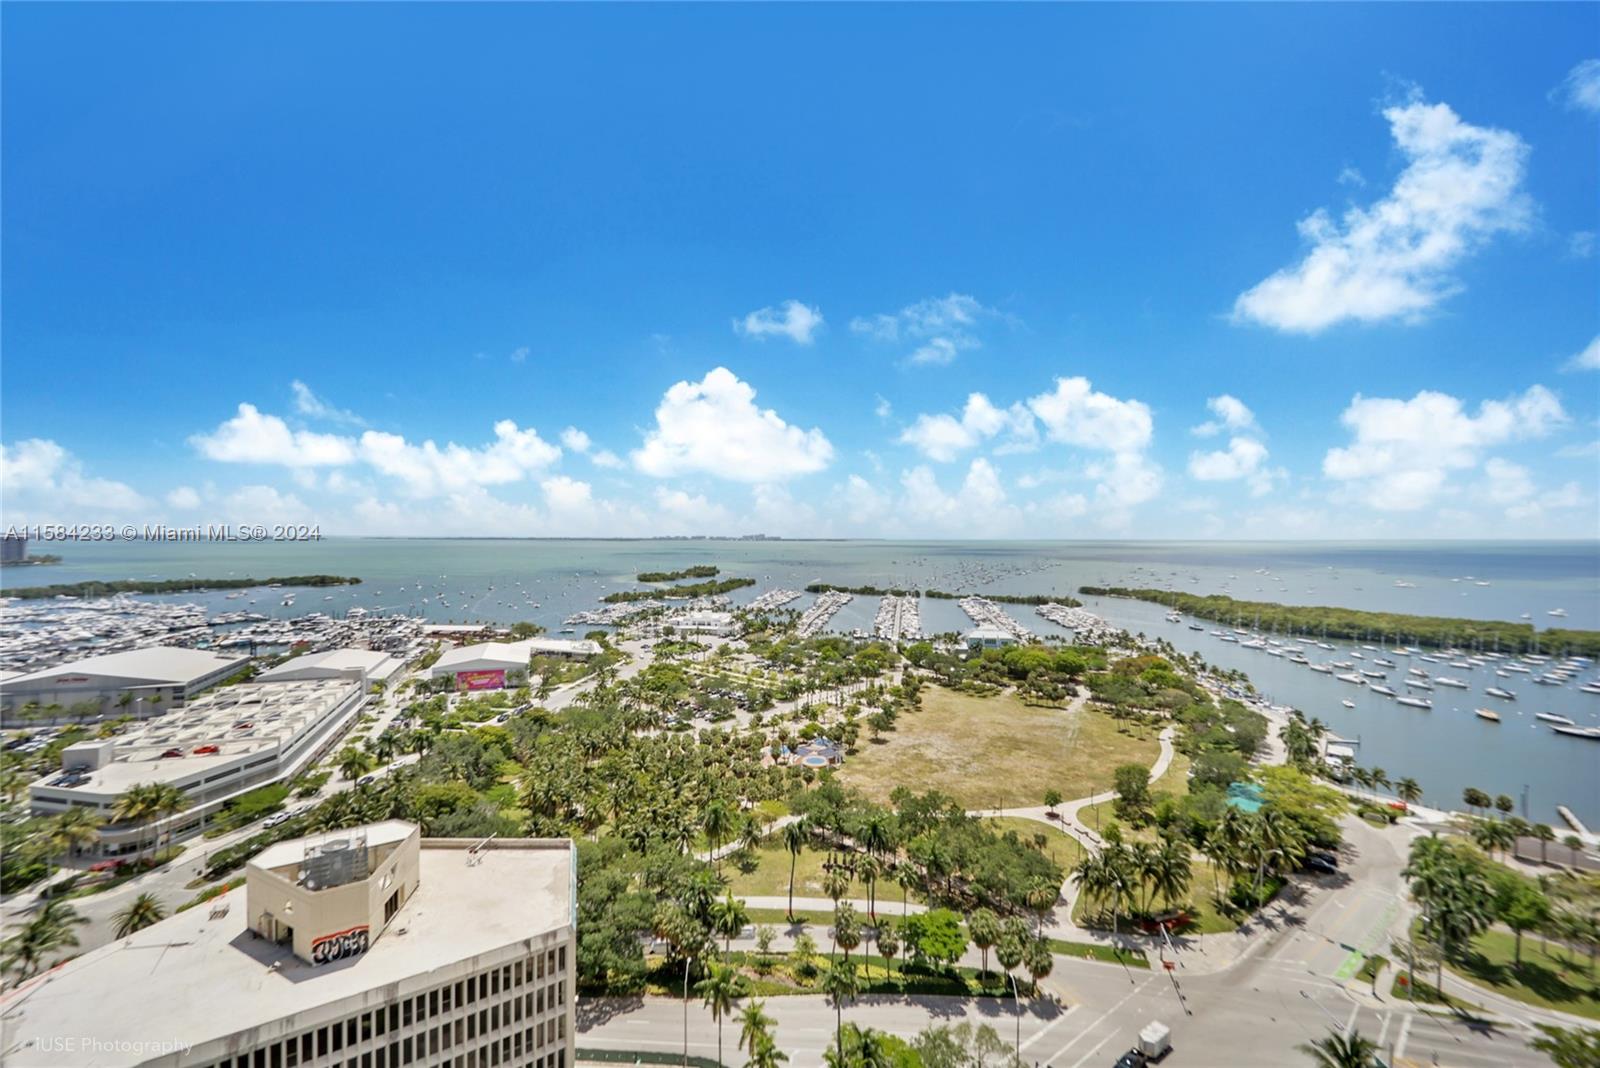 Astonishing Unobstructed Direct East and South Bayview. One of the kind PH Ritz Residence Coconut Grove with oversized separate terraces with amazing views of the ocean and breathtaking sunrise and sunset postal views. This upgraded PH has 4935 sq ft with extra large rooms for entertaining while enjoying the magnificent views of the Biscayne Bay. Fully furnished with Superior Marble throughout, Upgraded Stainless Viking Kitchen including Granite Countertops. Master Bath with Jacuzzi, Shower, and Double sinks. Three terraces, Exclusive Ritz lifestyle shares amenities with the Hotel including Concierge, Restaurant, Pools, Gym, Spa, and more. Heart of Coconut Grove. Easy access to and within walking distance from Fresh Market, Cocowalk, Marina, Fine Dining, Shopping and so much more.